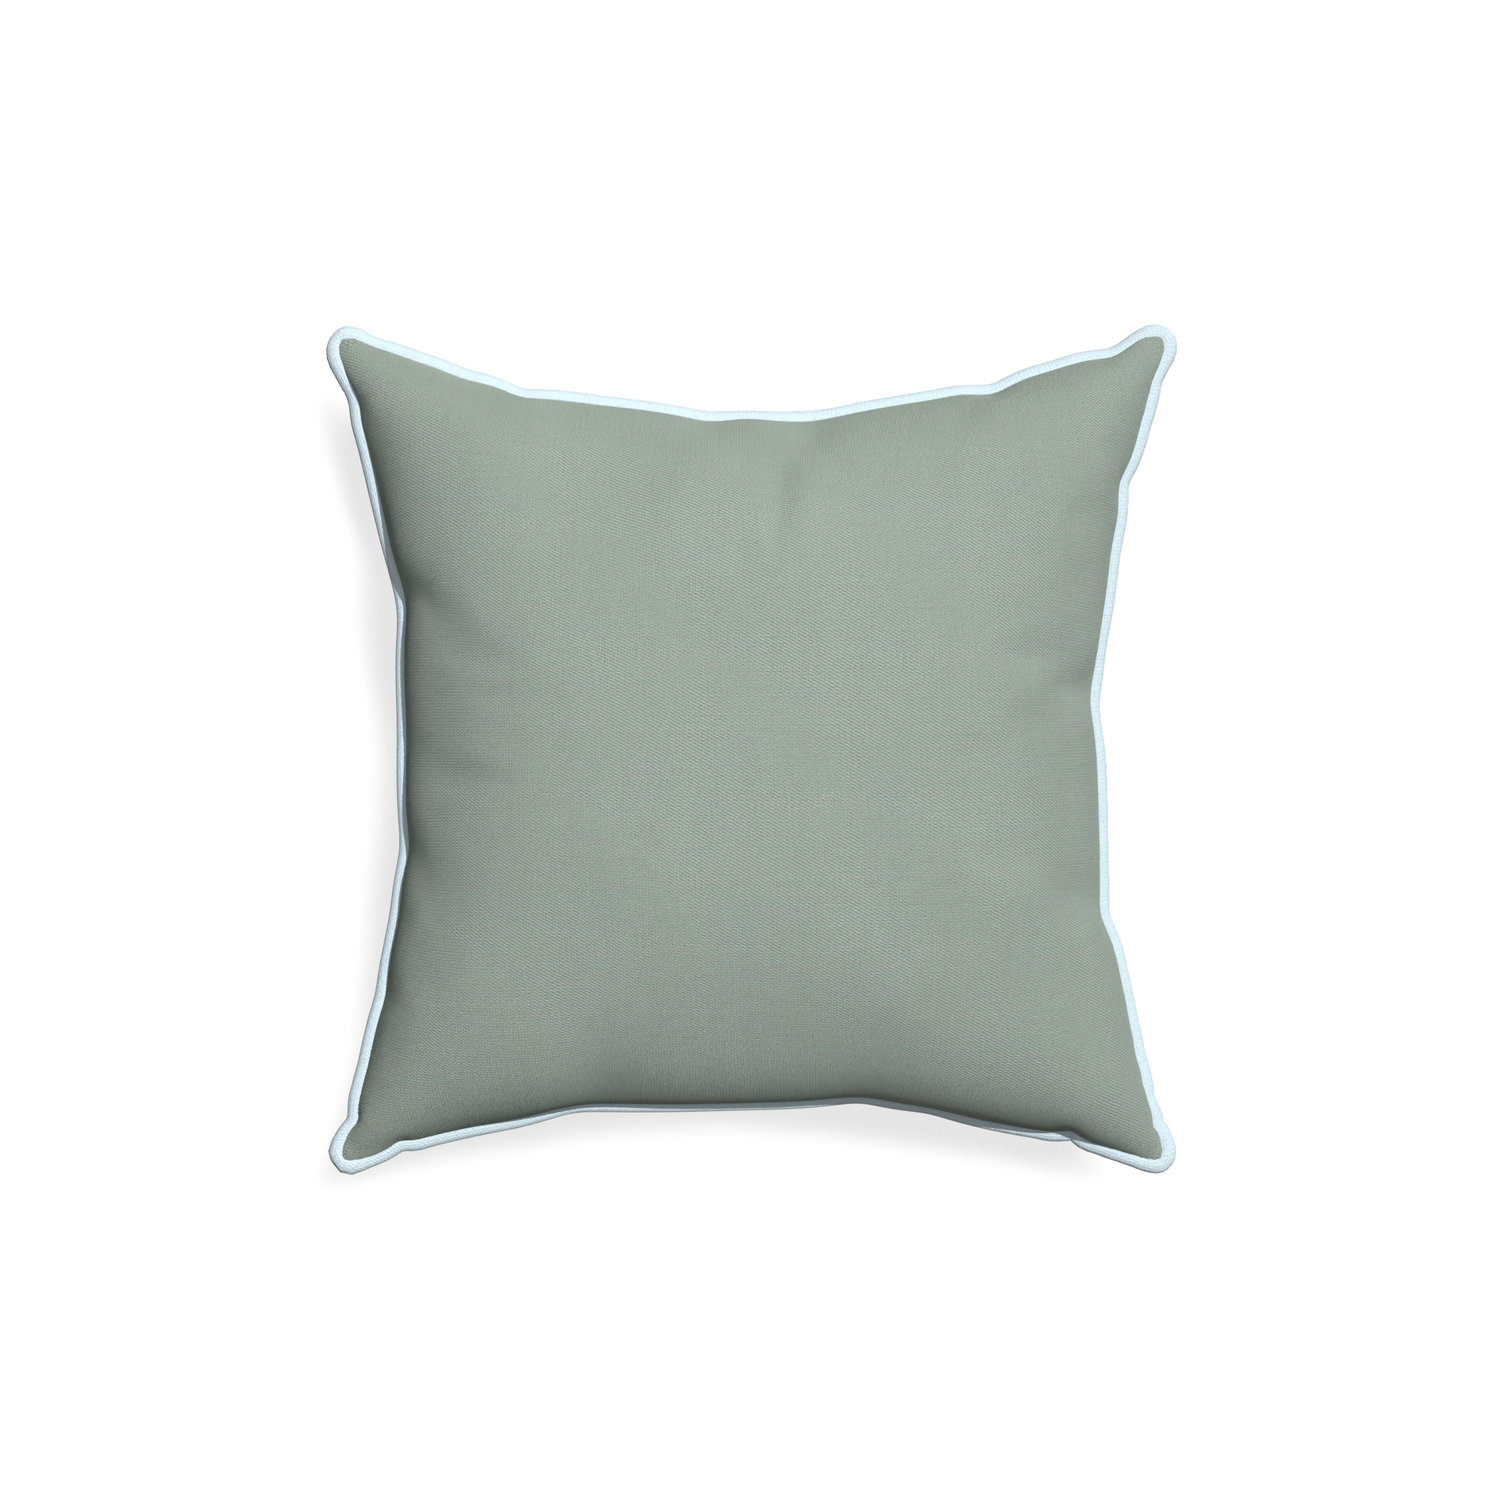 18-square sage custom pillow with powder piping on white background